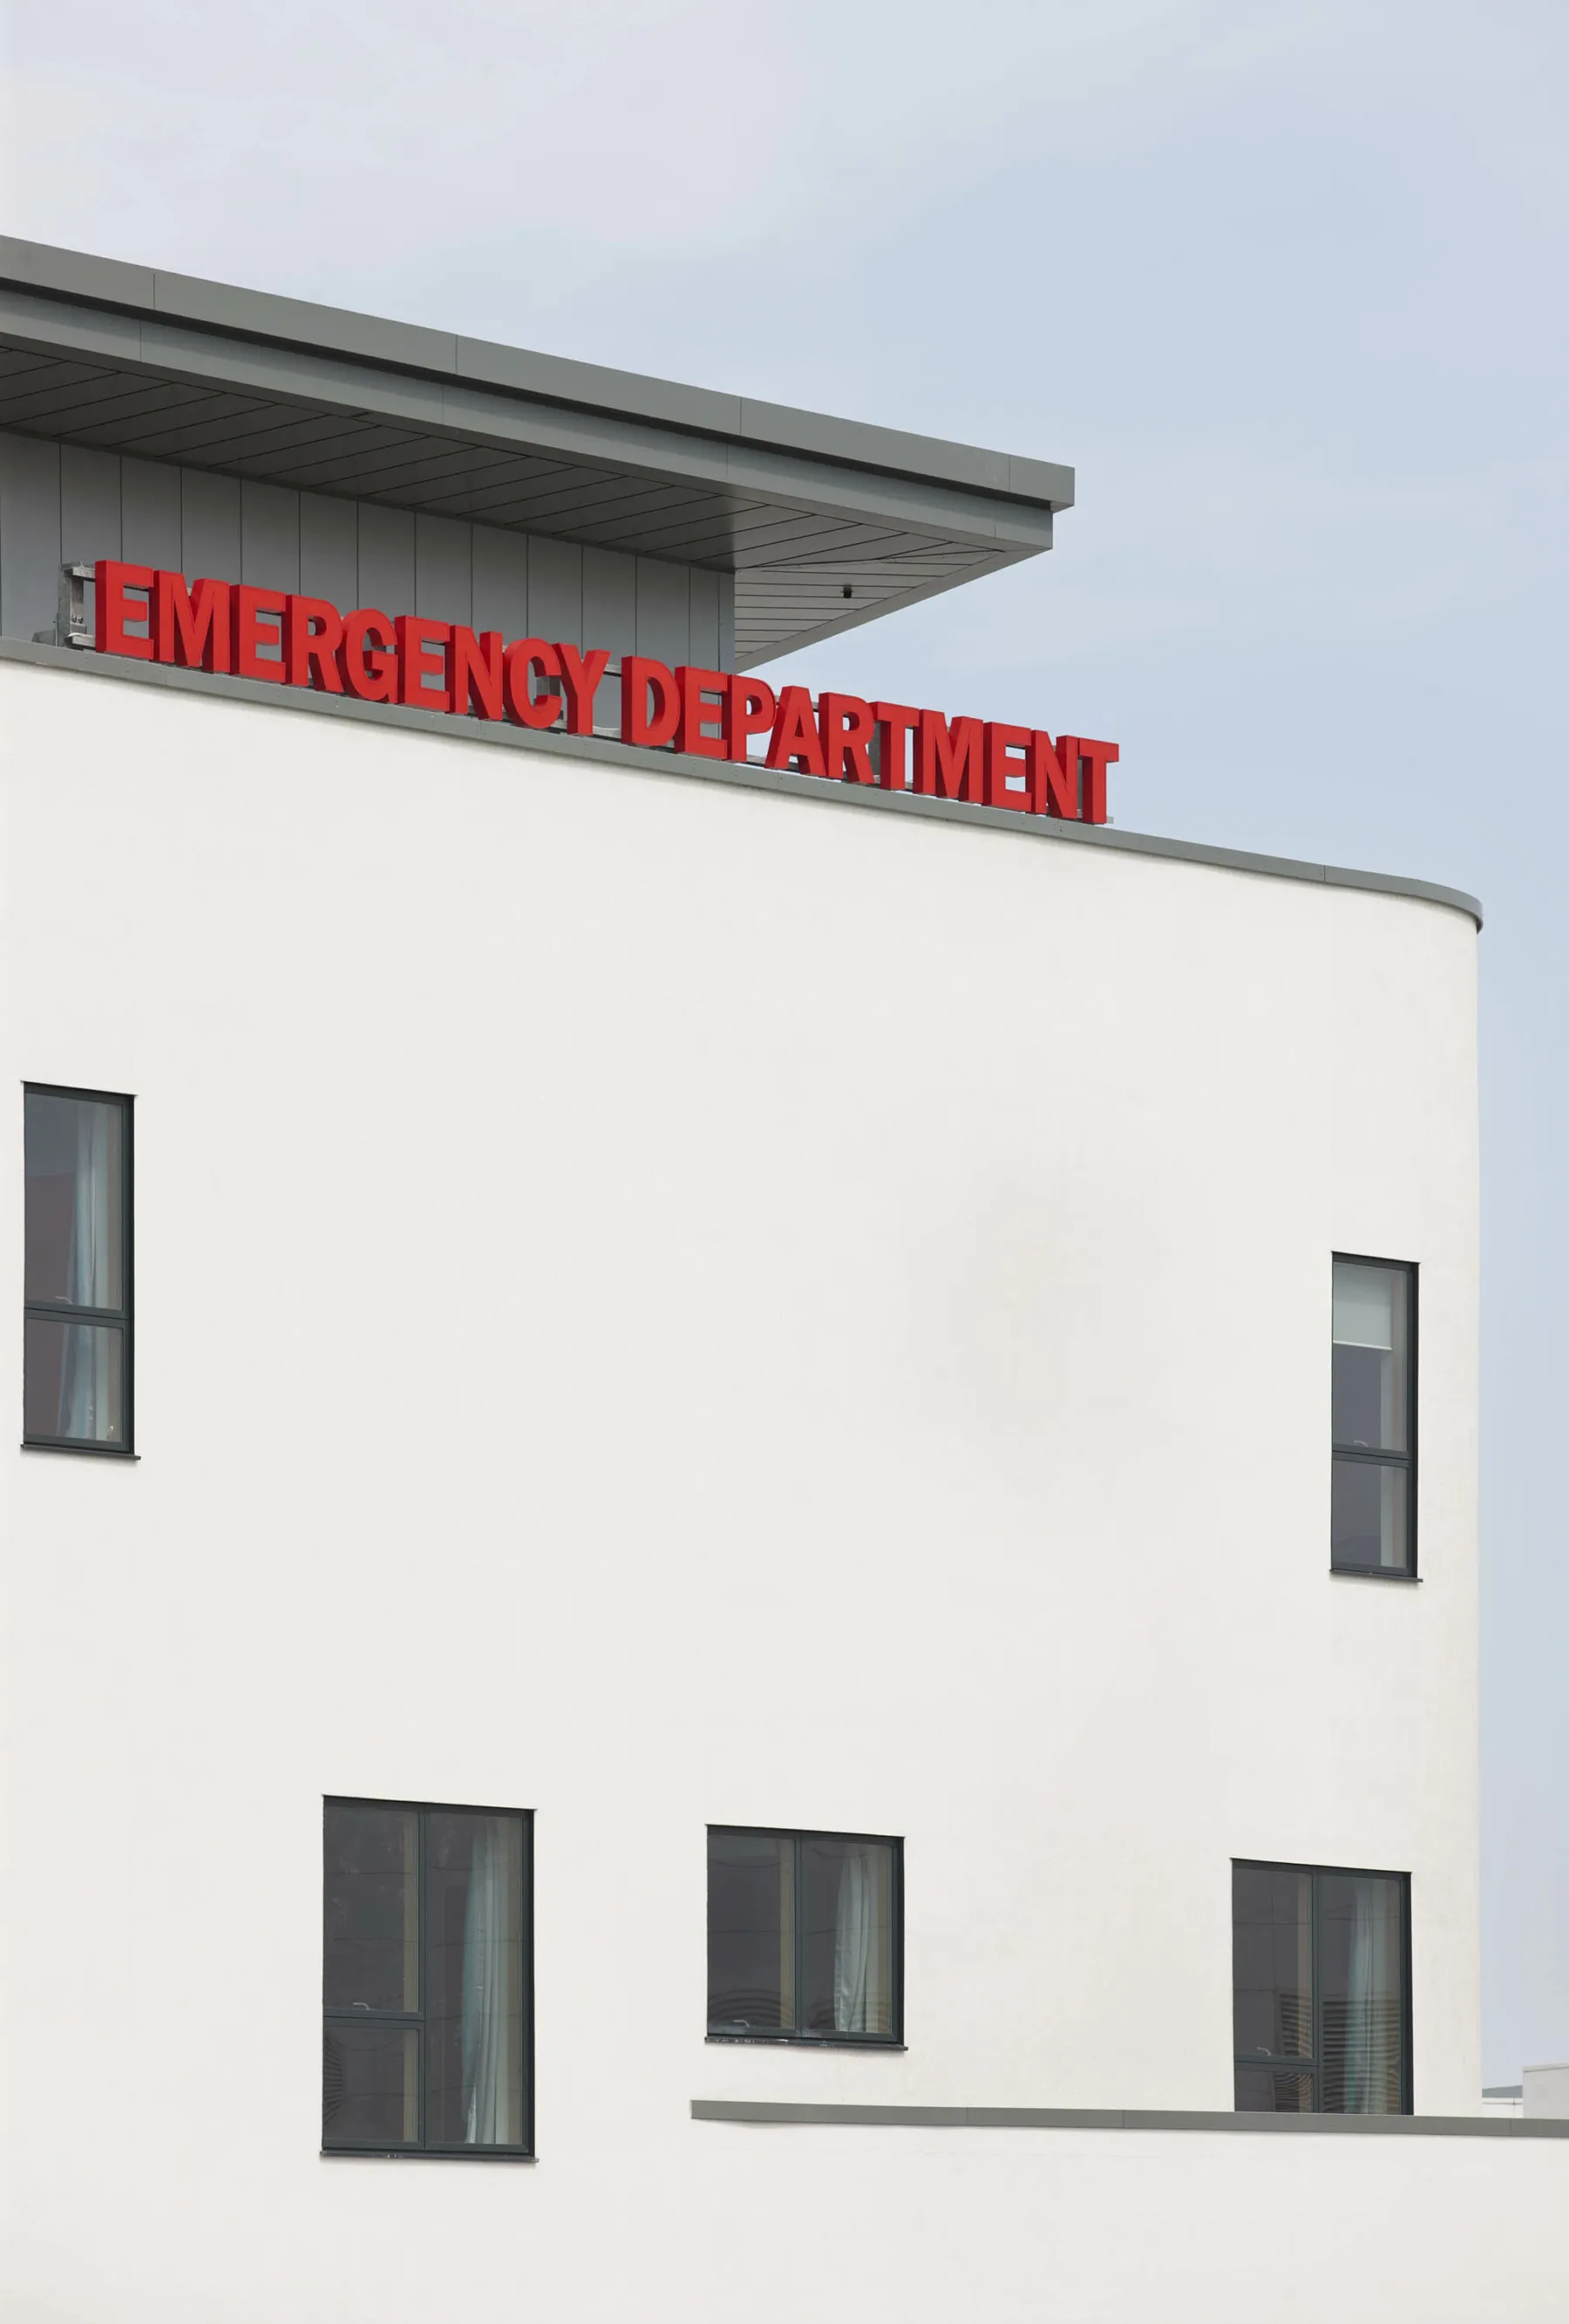 Exterior detail of the Emergency Department of the Royal Hospital for Sick Children and Young People, Edinburgh. A large, illuminated red sign "Emergency Department" sits above the main entrance to the white-rendered building.